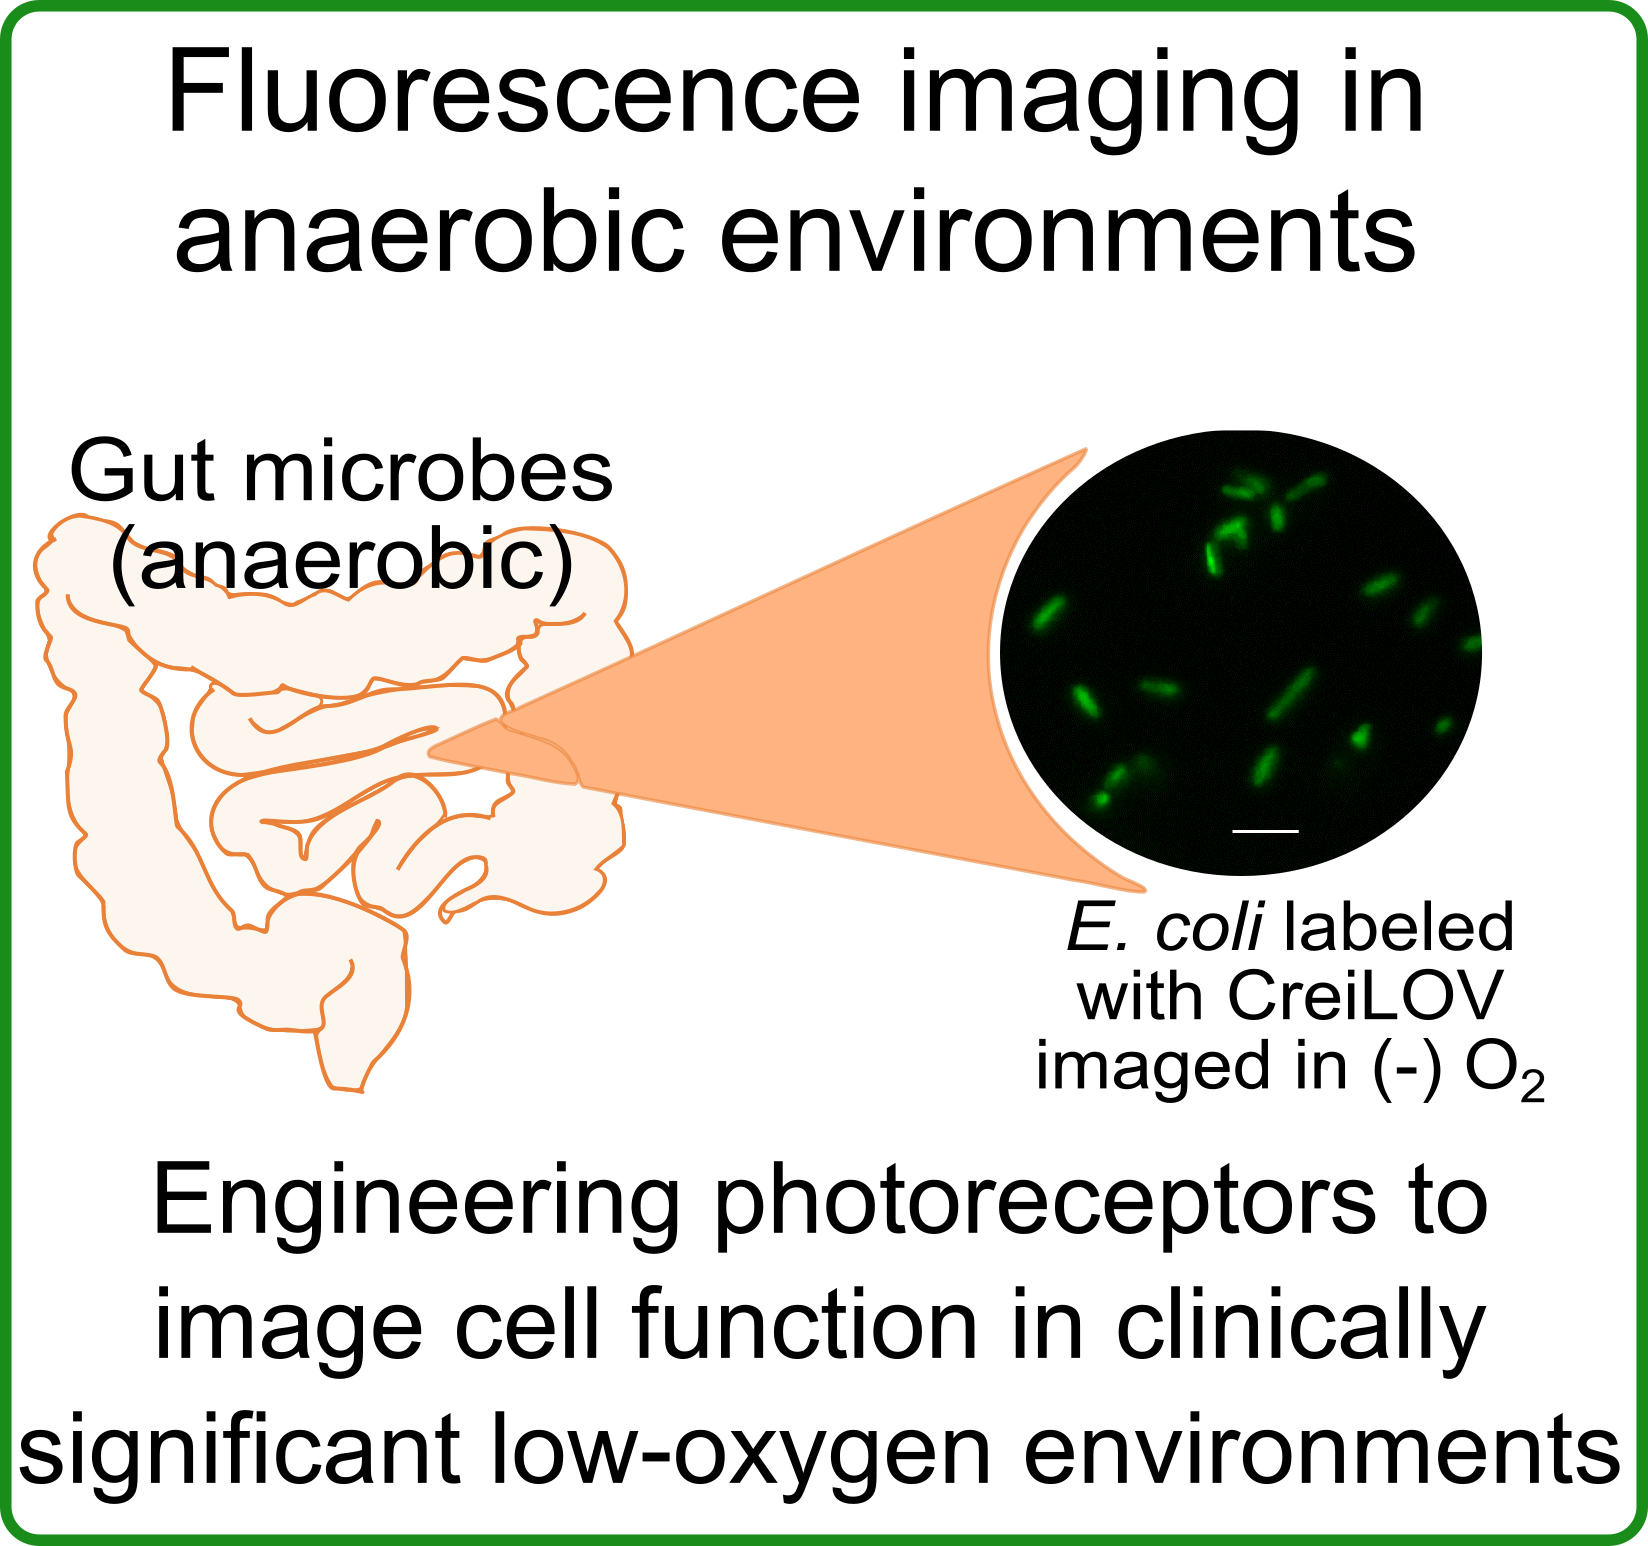 Fluorescence imaging in anaerobic environments